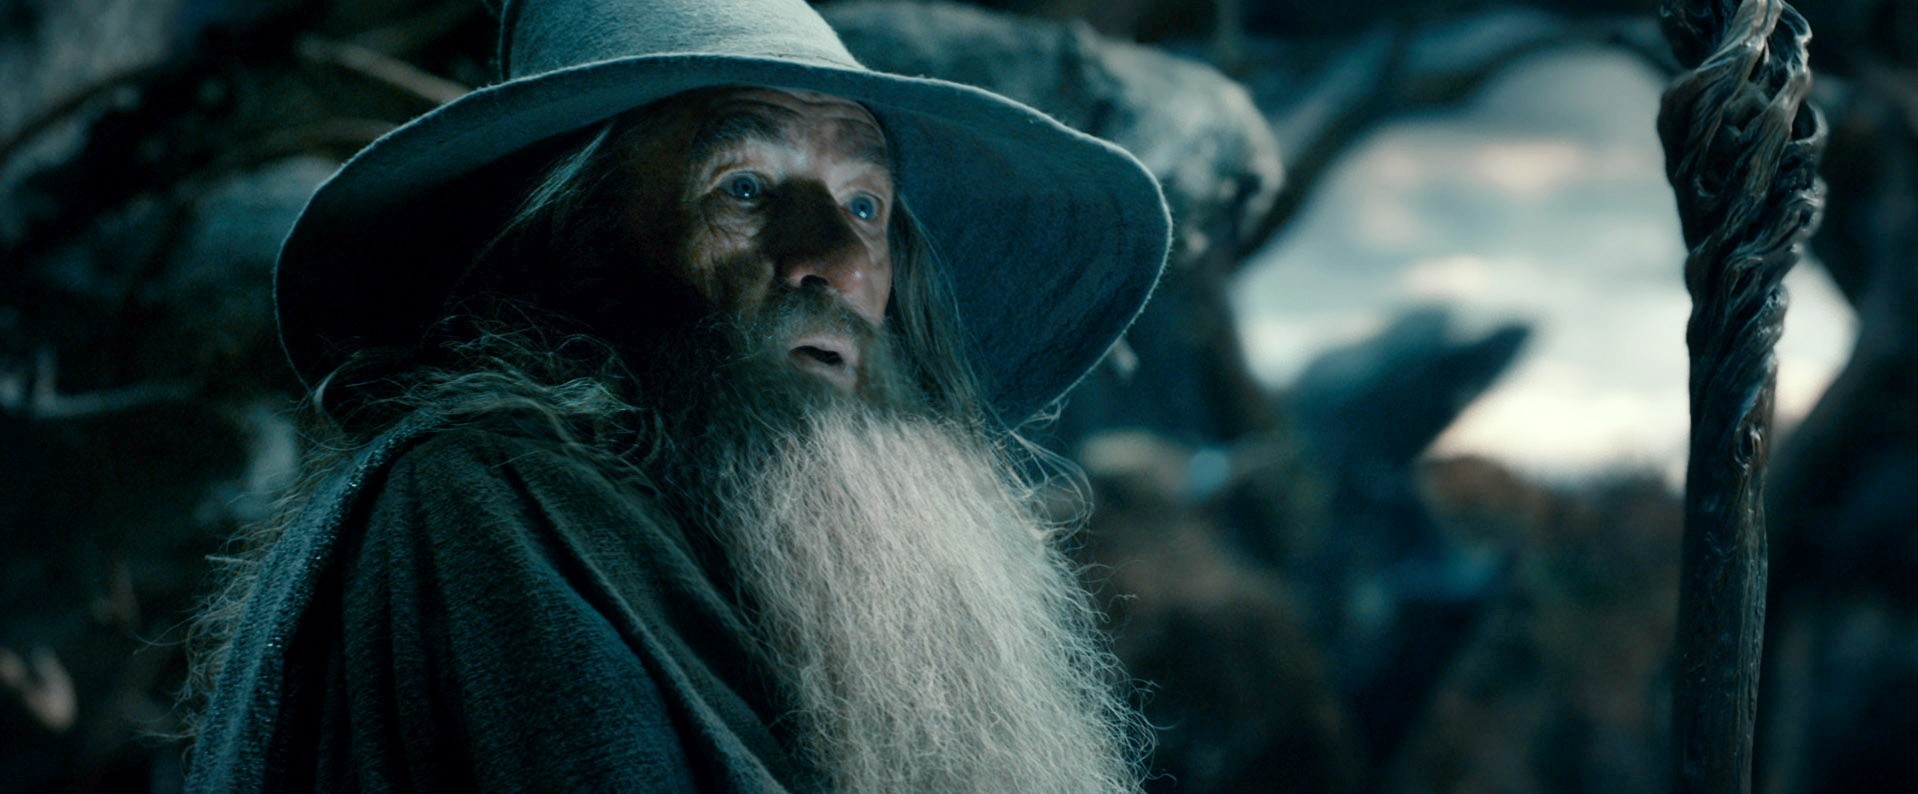 Ian McKellen stars as Gandalf in Warner Bros. Pictures' The Hobbit: The Desolation of Smaug (2013)